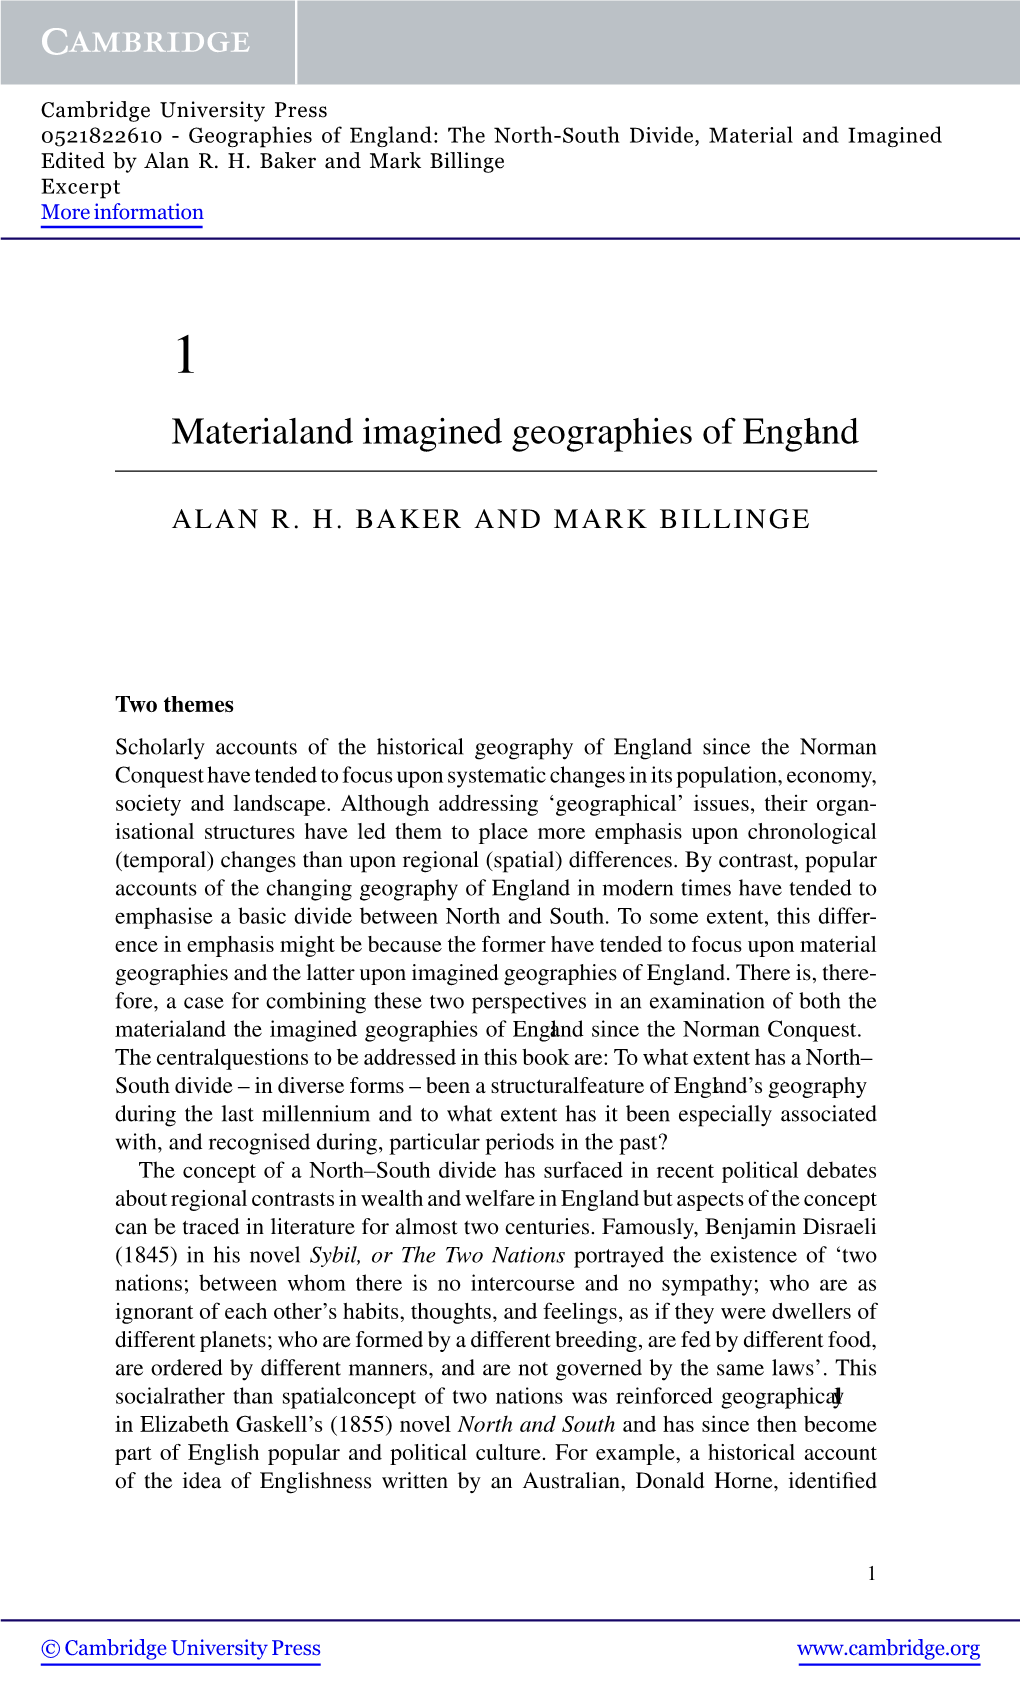 Material and Imagined Geographies of England 3 the Concept of a North–South Divide in England Will Be Approached in This Present Book in Two Ways